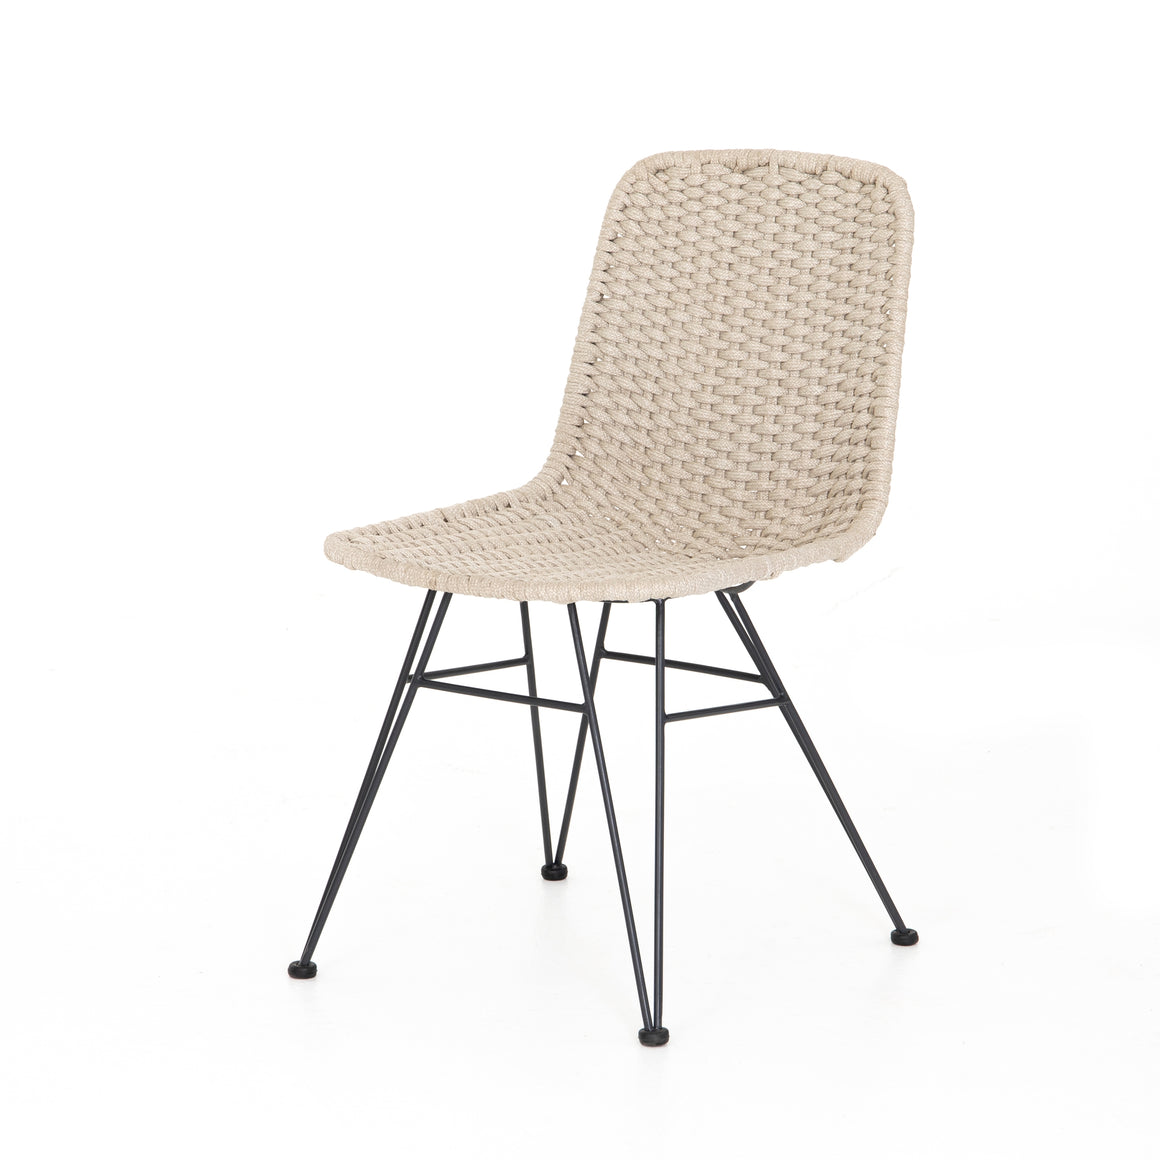 Dema Outdoor Dining Chair - Natural